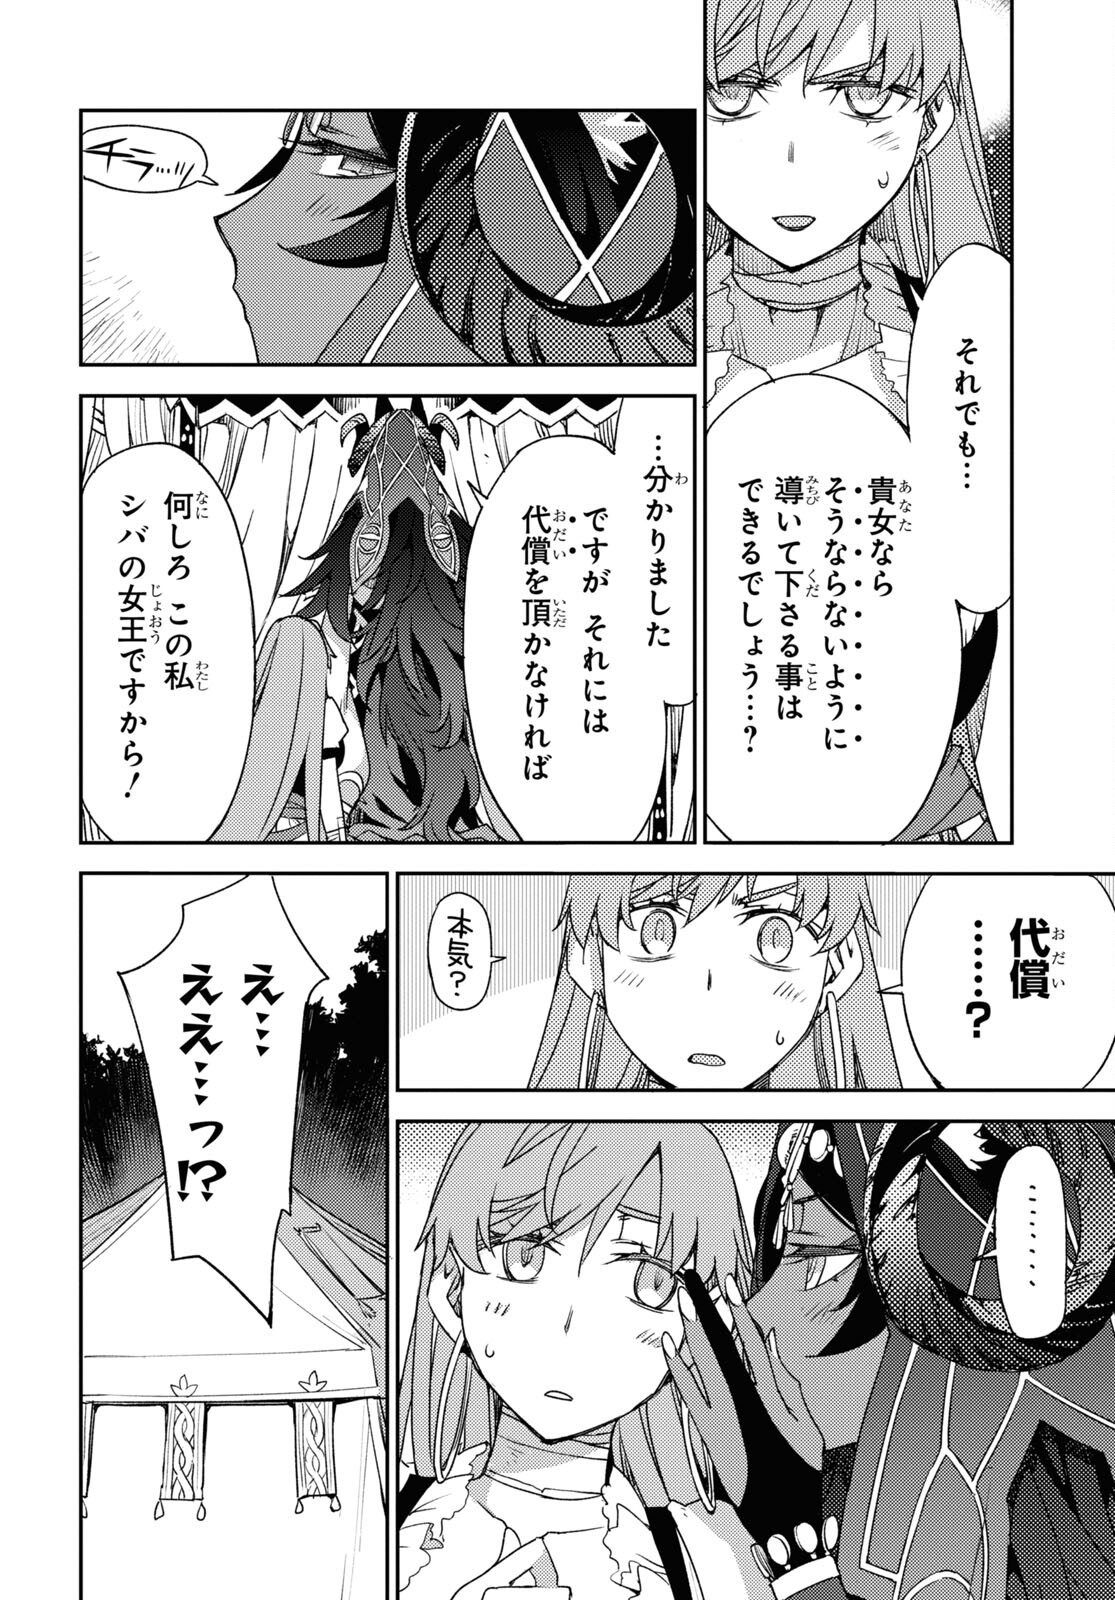 Fate/Grand Order -Epic of Remnant- 亜種特異点IV 禁忌降臨庭園 セイレム 異端なるセイレム 第36話 - Page 20